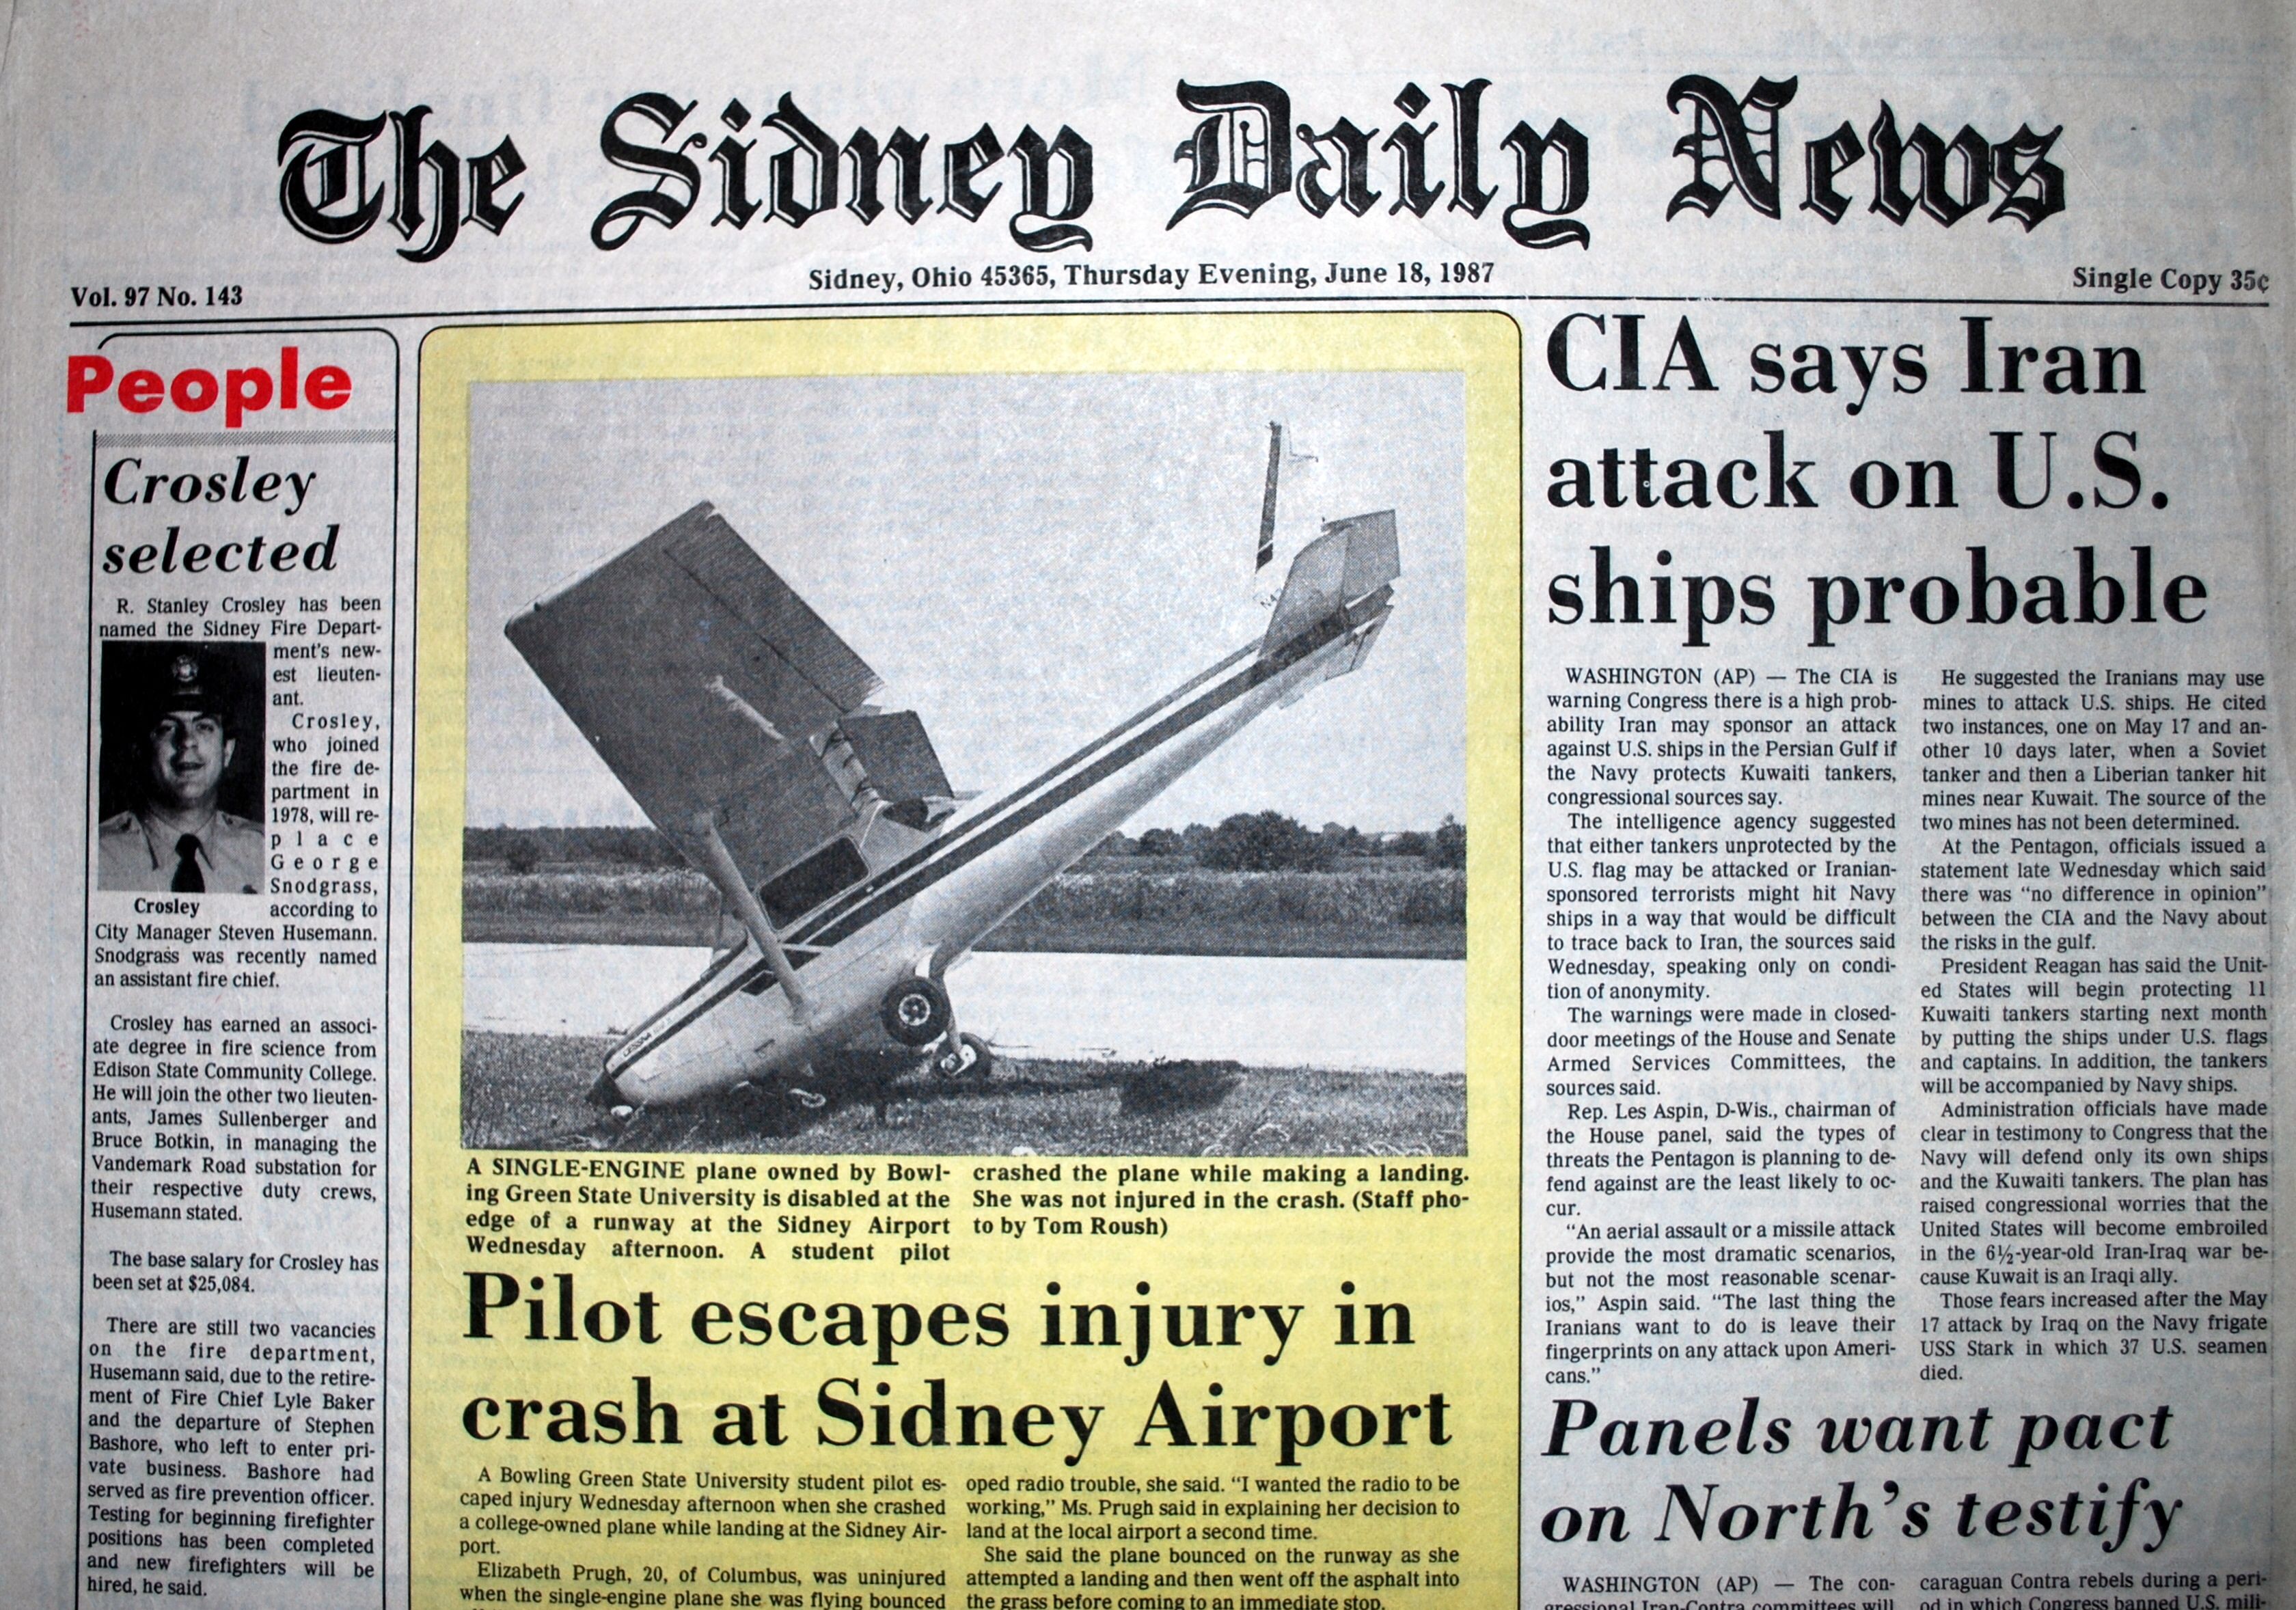 Sidney Daily News: An American Newspaper Providing News, Sports, Obituaries, Classifieds And More